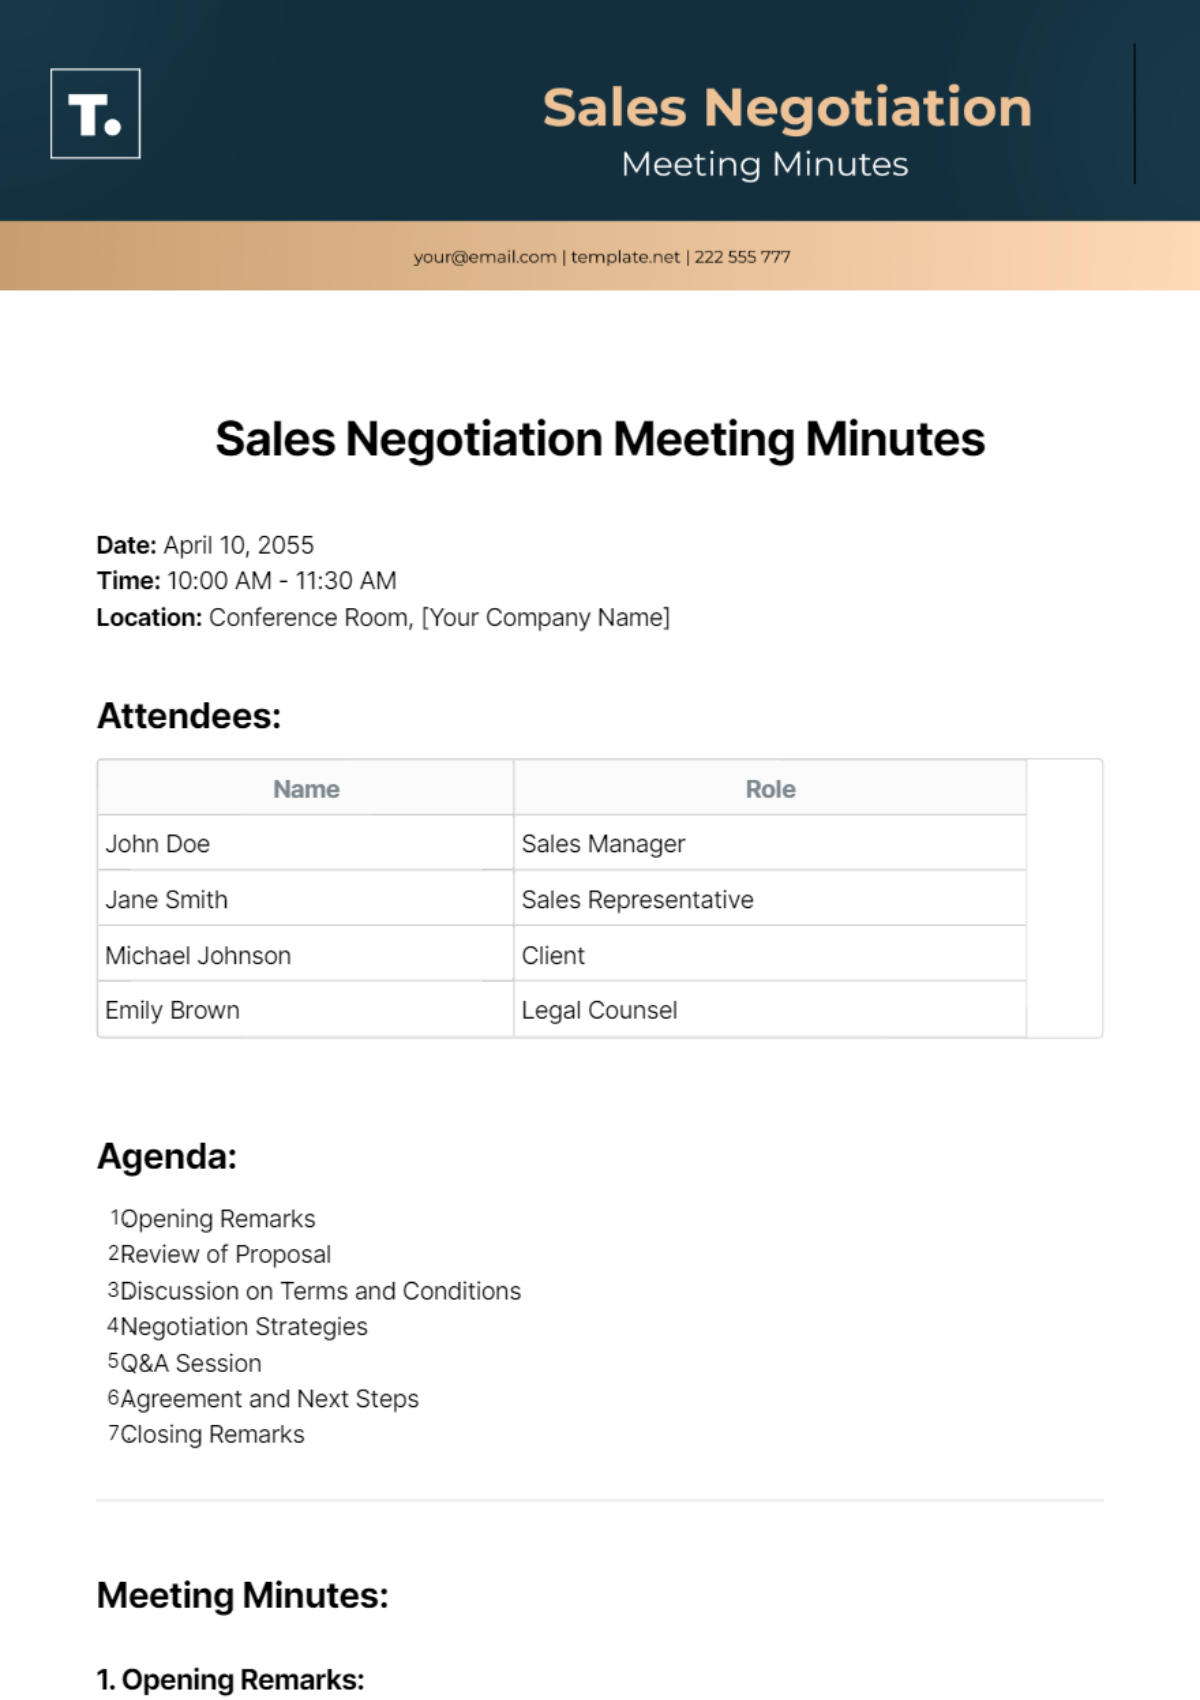 Sales Negotiation Meeting Minutes Template